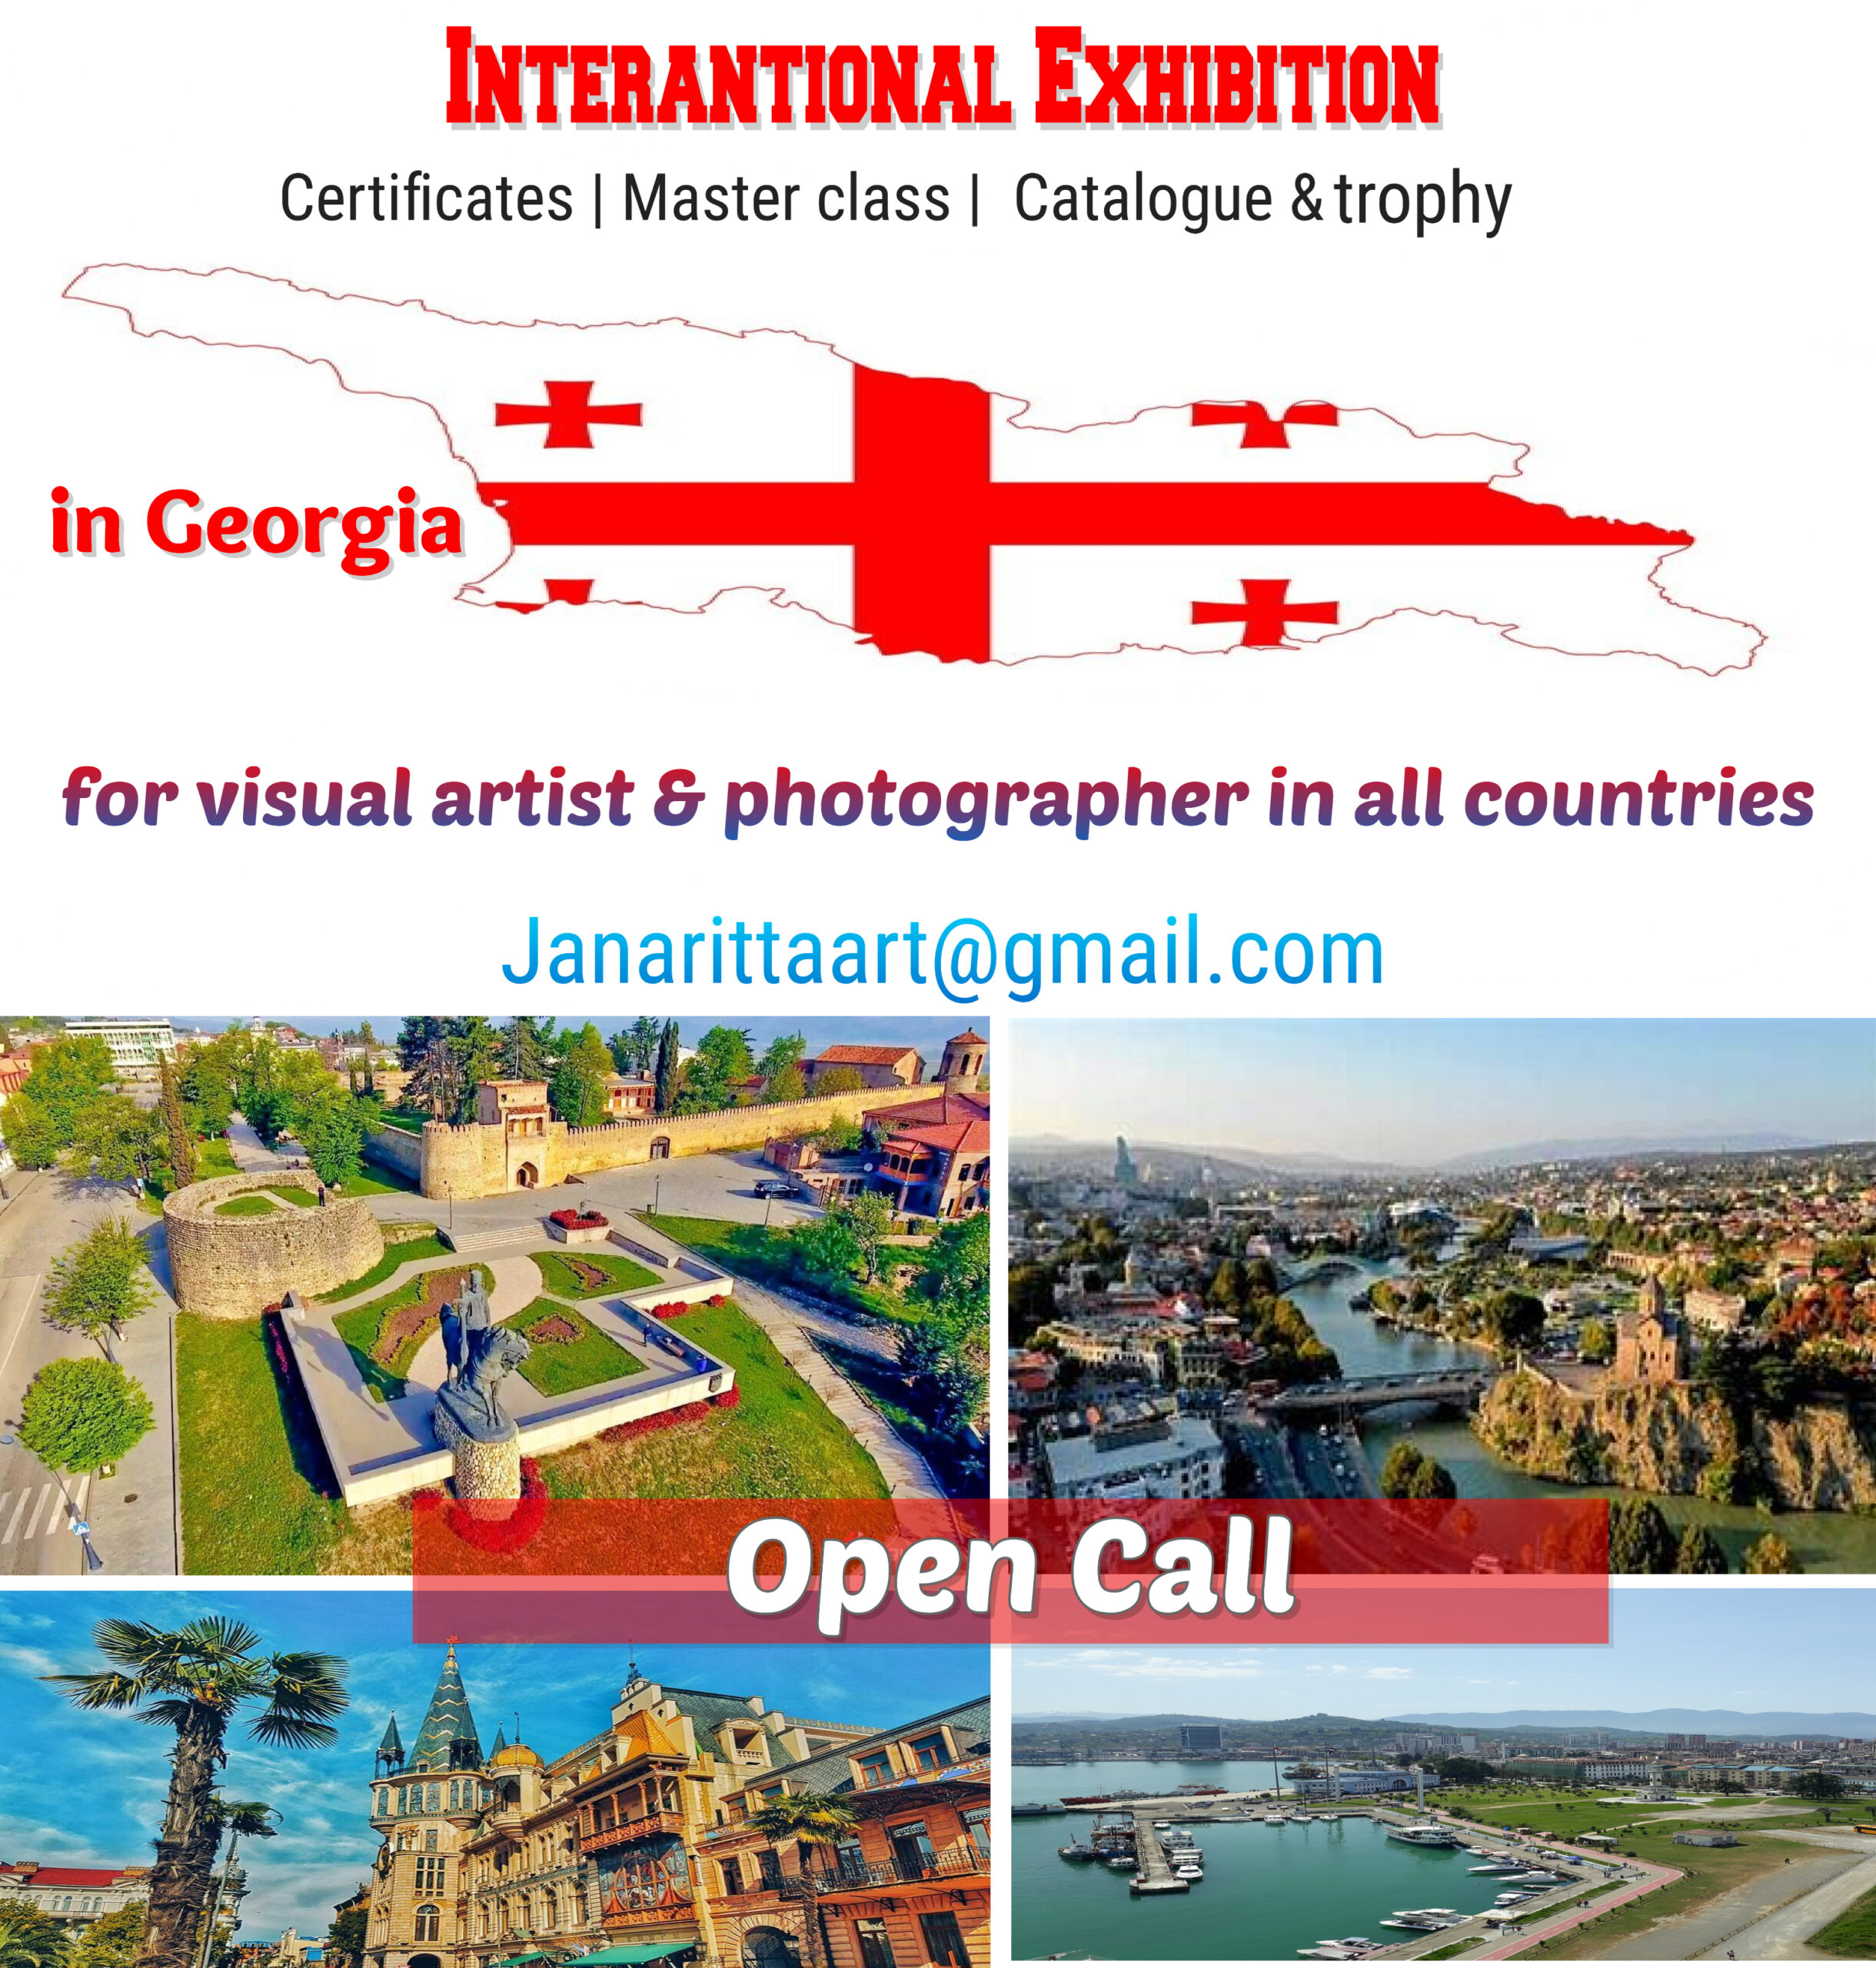 Open call to apply for the international exhibition in Georgia